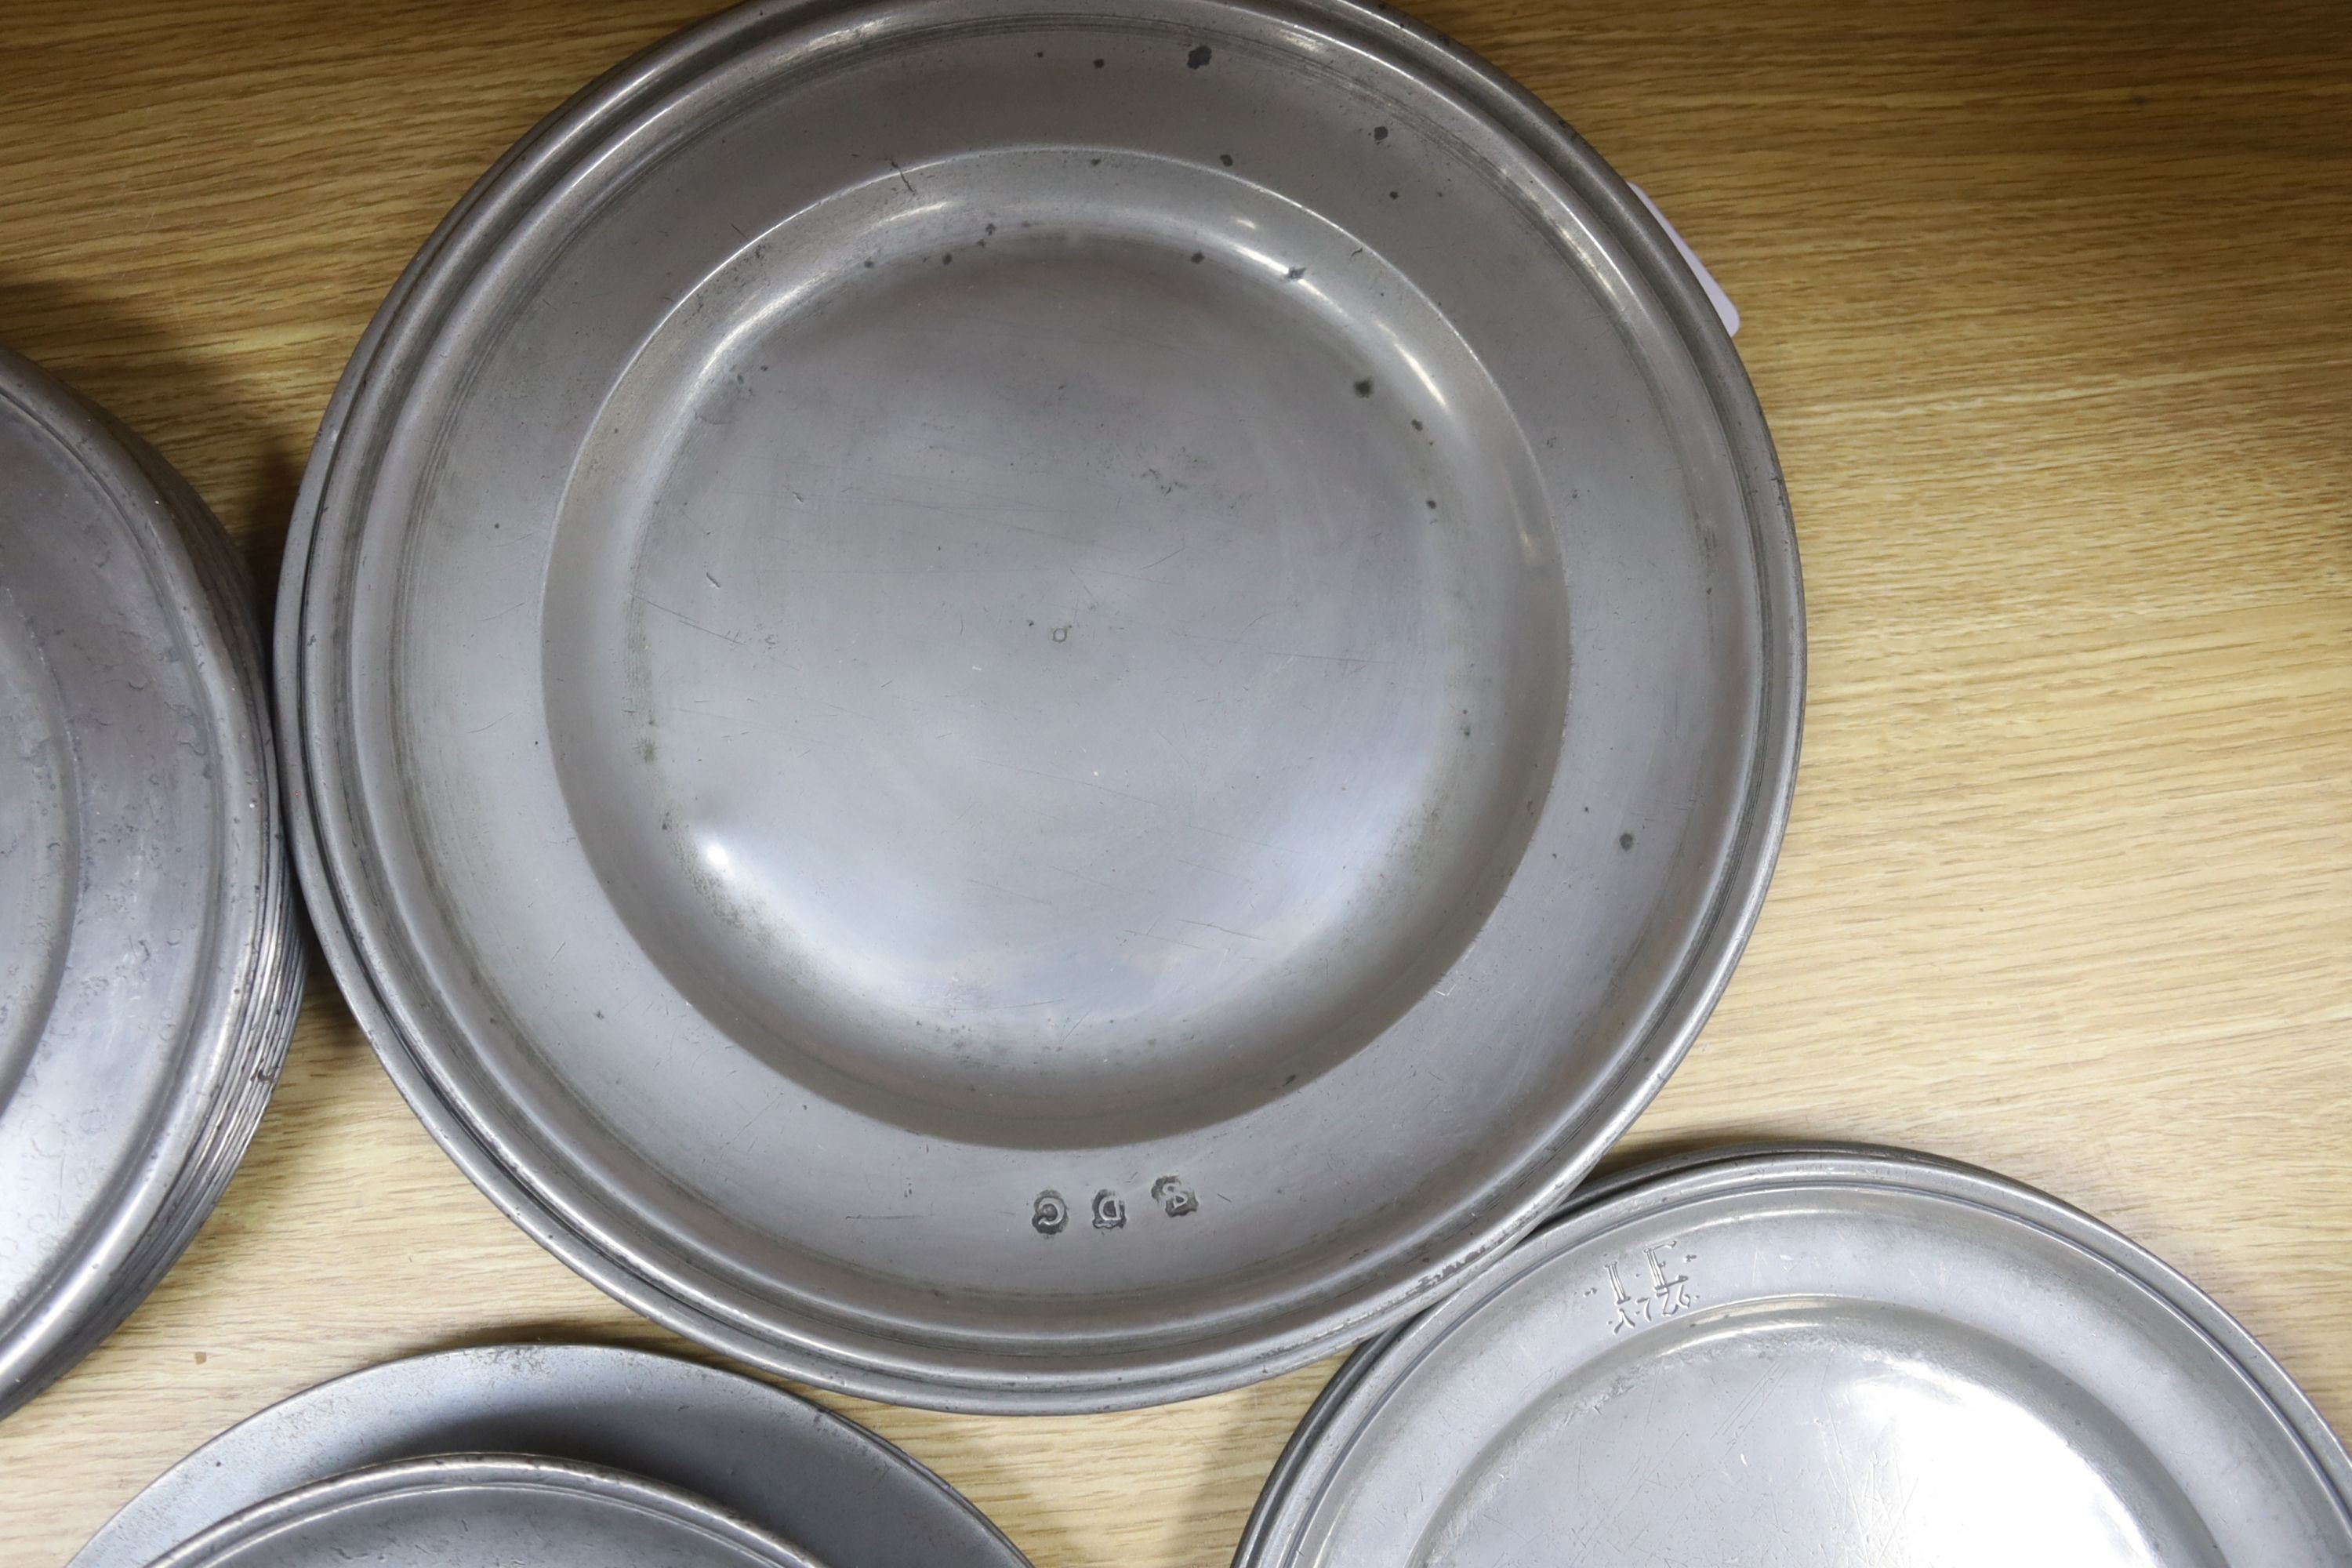 18th century pewter flat wares - a set of eighteen pewter plates by Henry Maxted, 9in. and 10in., two dishes by Daniel Collier and GBG, 12in., two Robert Bush plates stamped Redlynch house, 9.5 inches, a bowl with broad